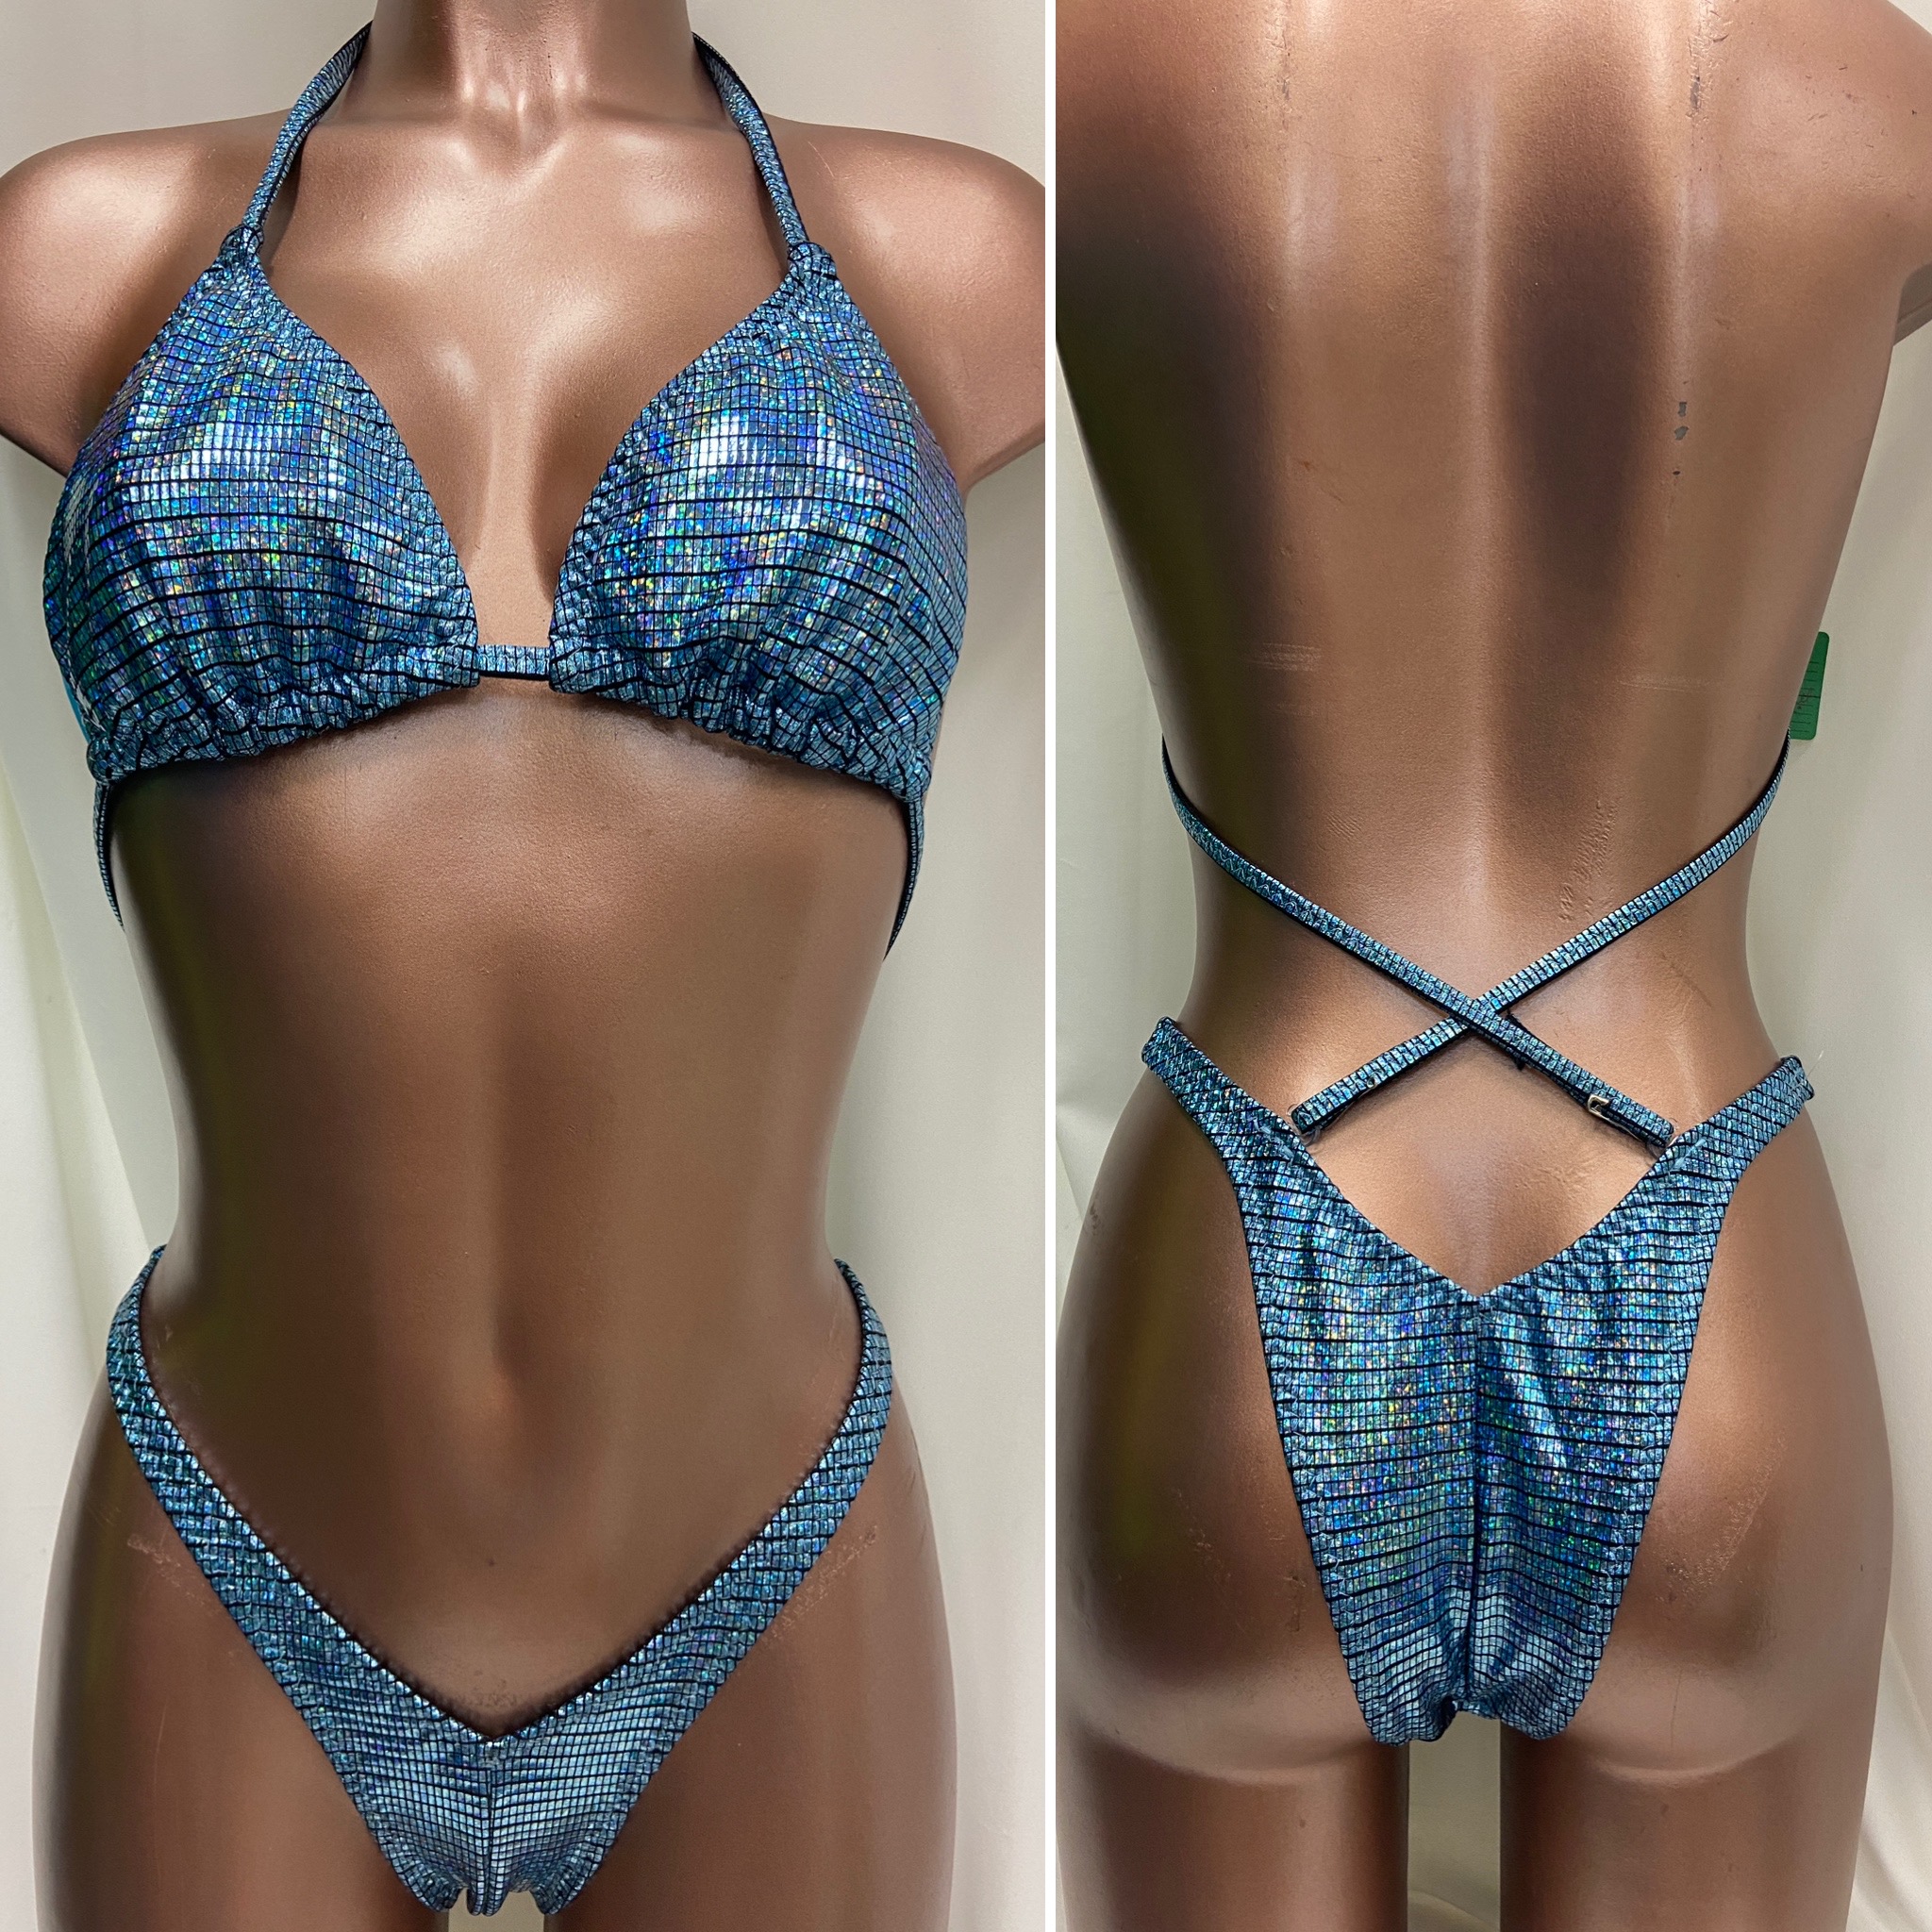 P7011
$85 
C sliding top
small front +1" each hip
xsmall back
light blue abstract hologram 